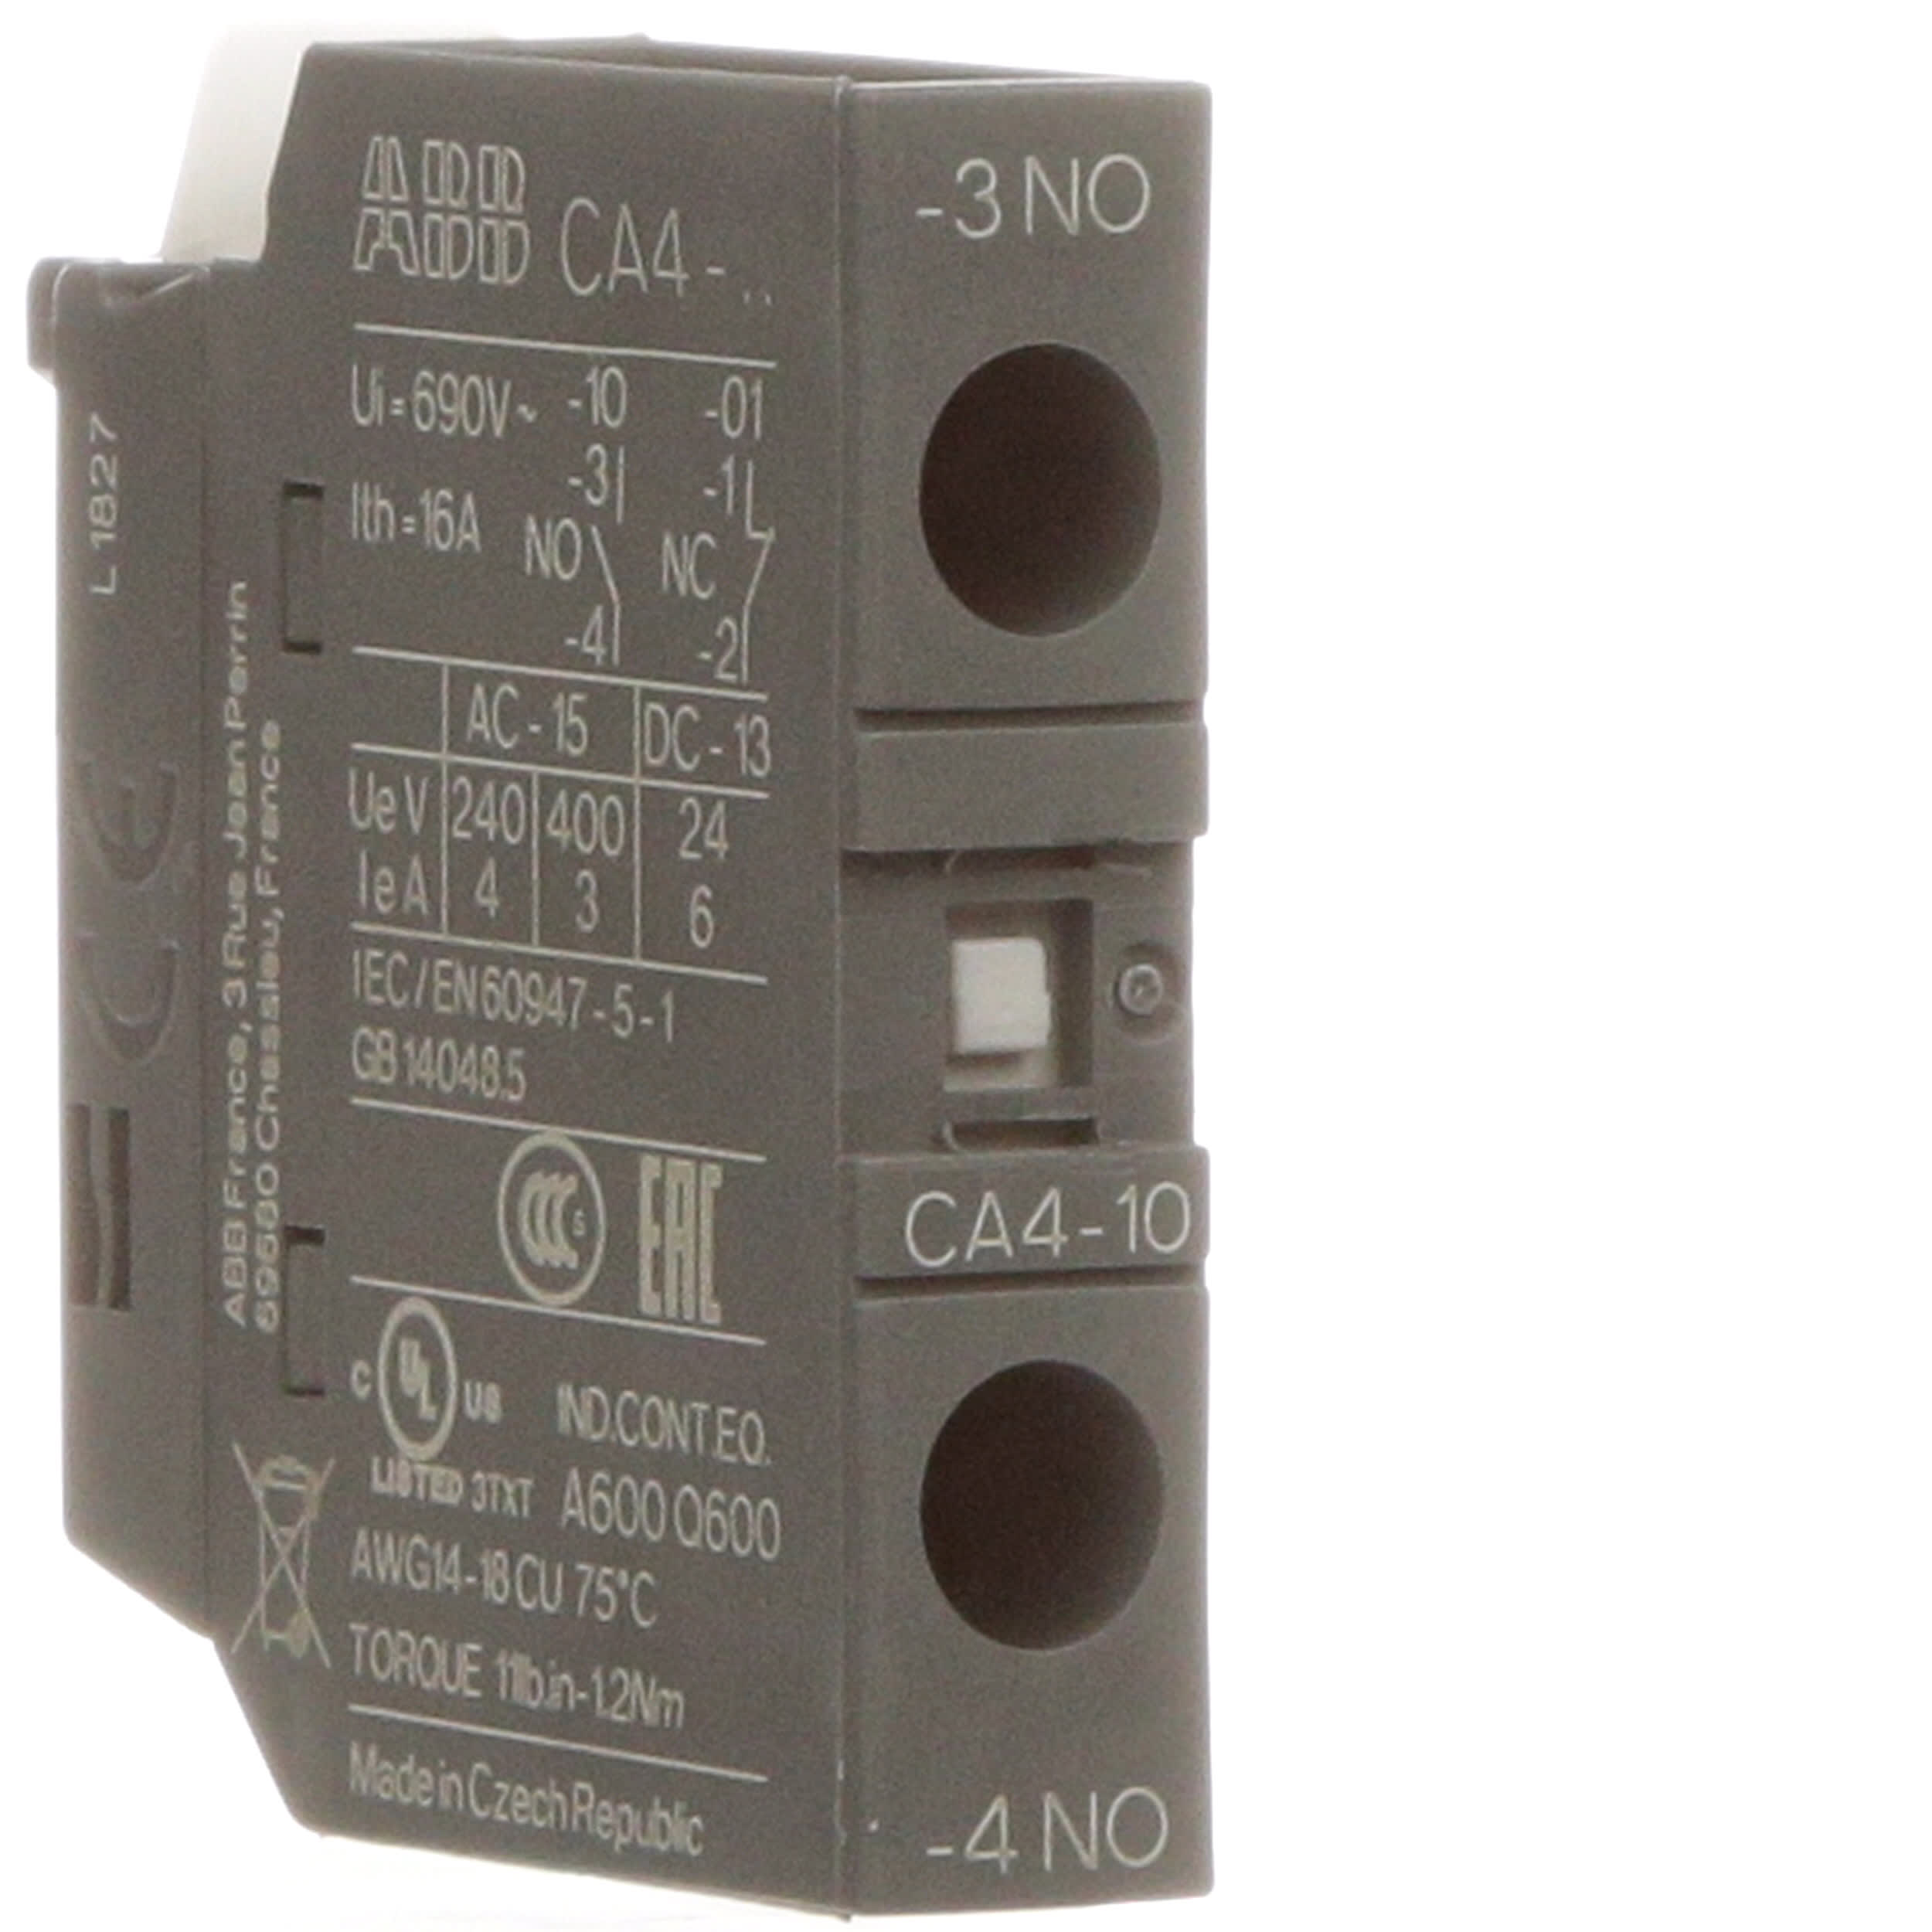 CA4-10-T 1SBN010110T1010 Auxiliary Contact Hilfskontakt Contact Auxiliaire ABB 